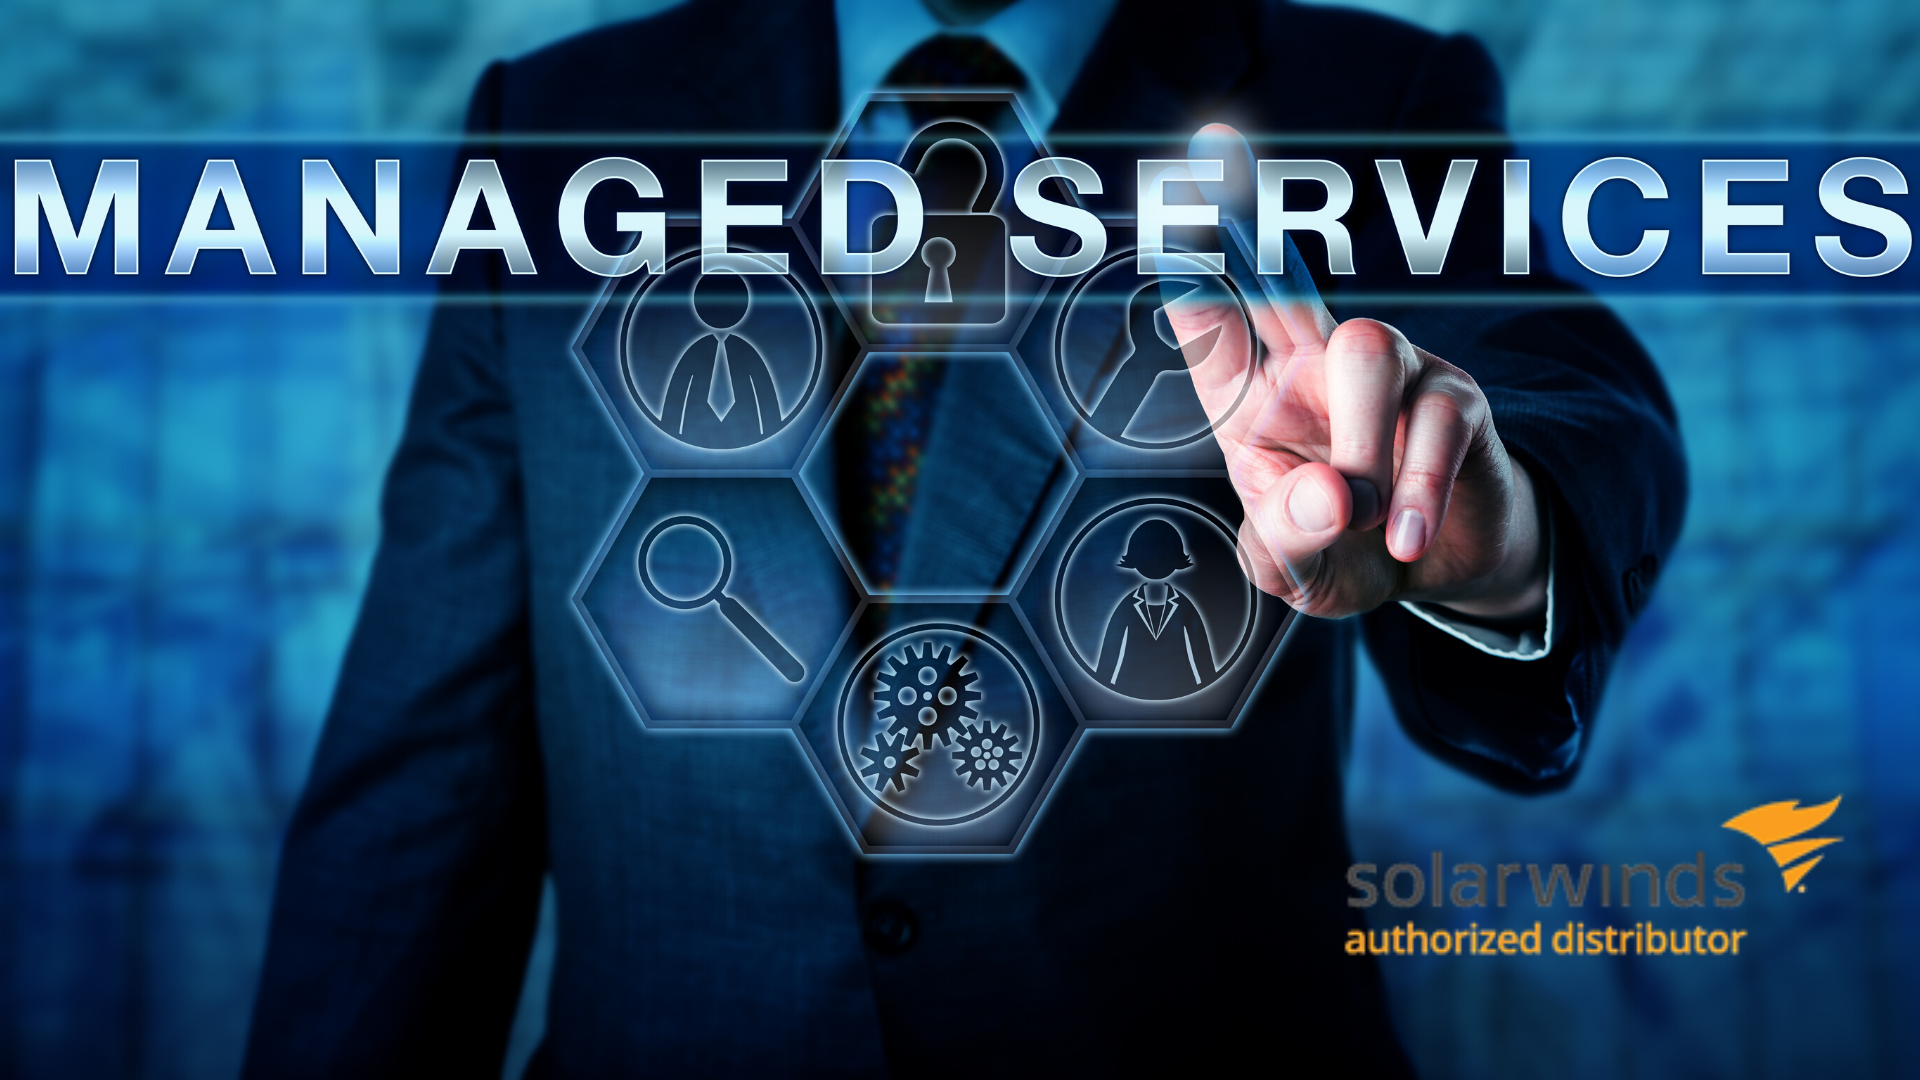 Adfontes Software’s SolarWinds Managed Services are in demand